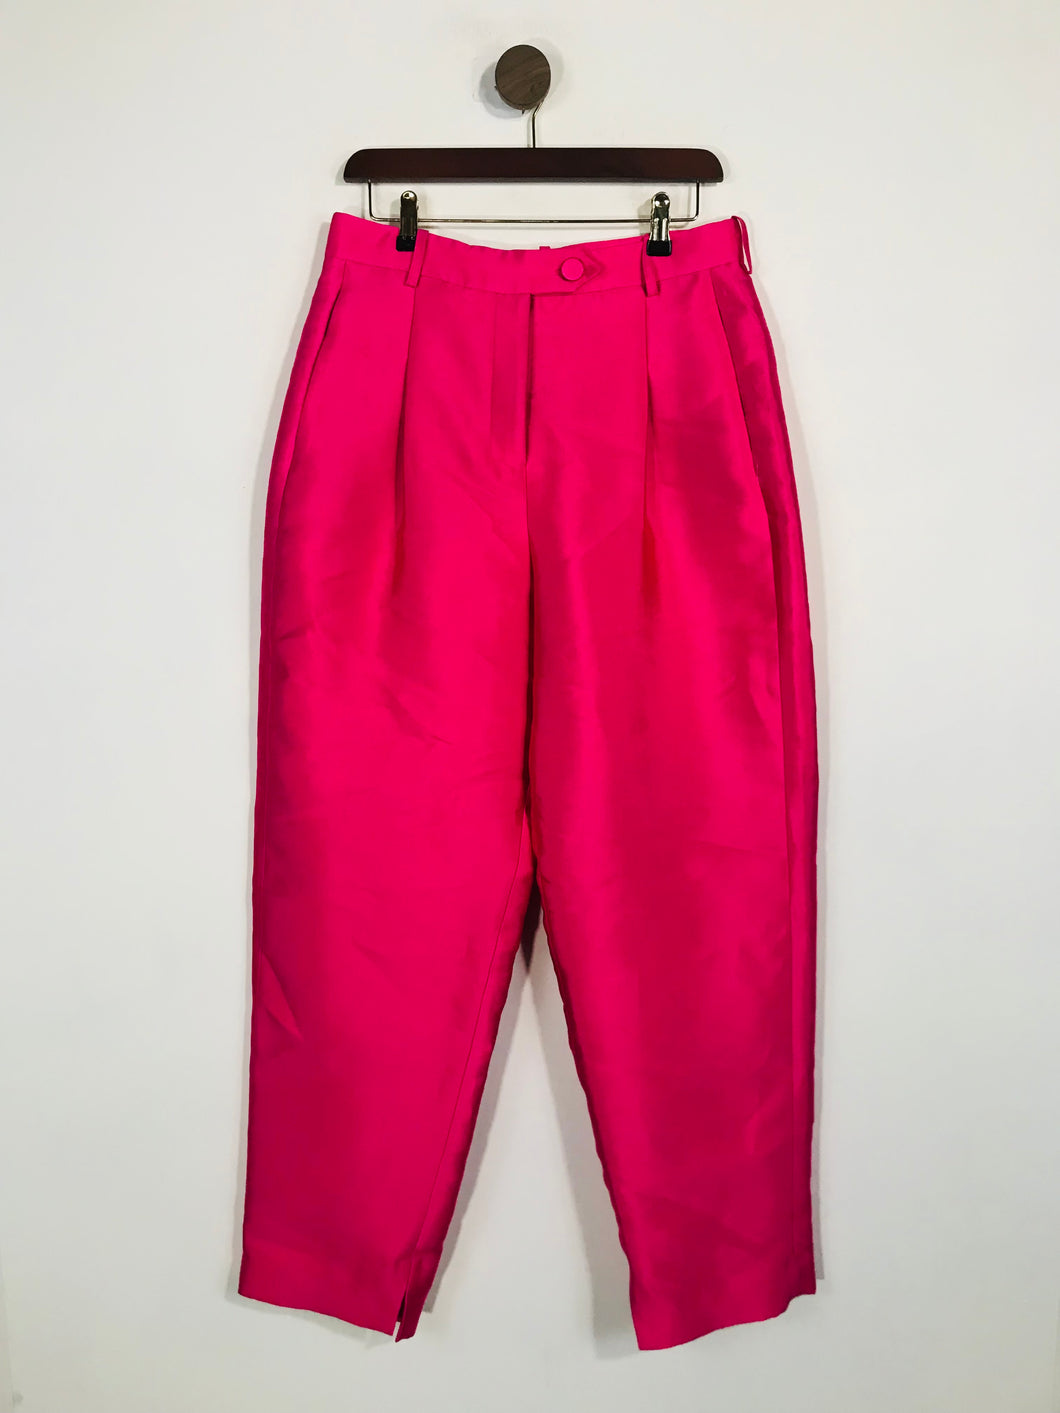 Topshop Women's High Waist Chinos Trousers NWT | UK14 | Pink